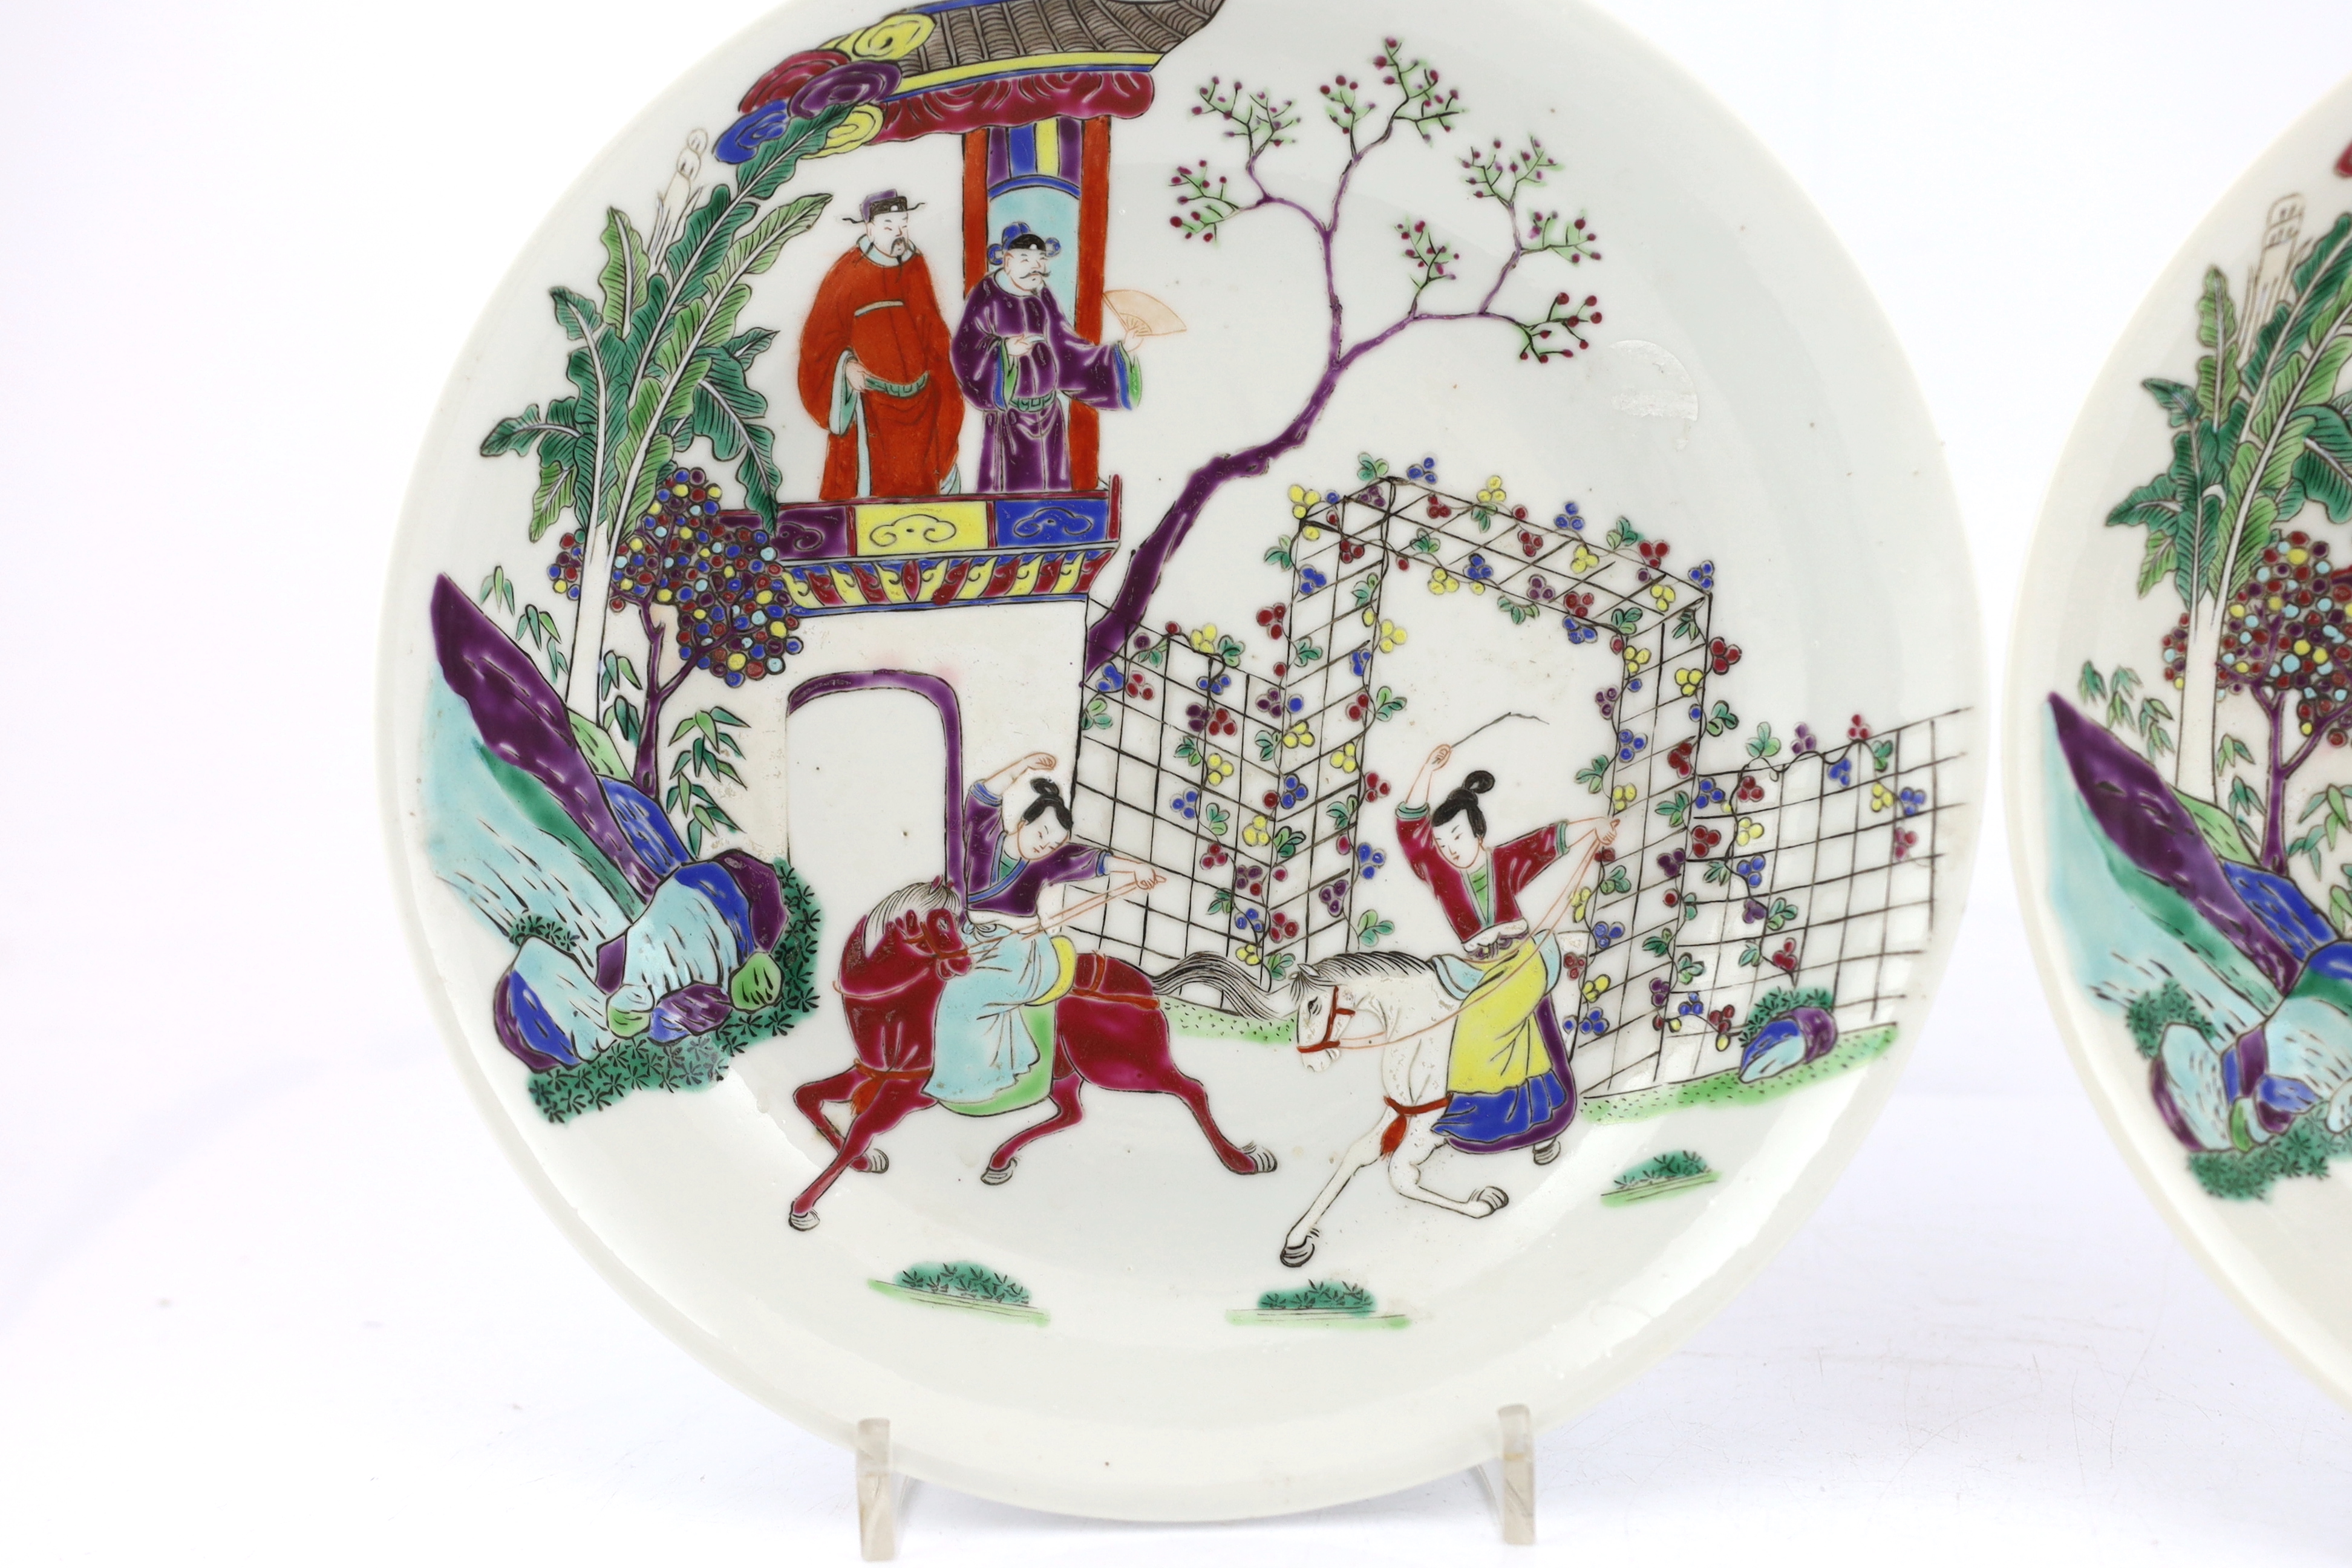 A pair of Chinese famille rose saucer dishes, Yongzheng mark but first half 19th century, one dish has a short hairline crack